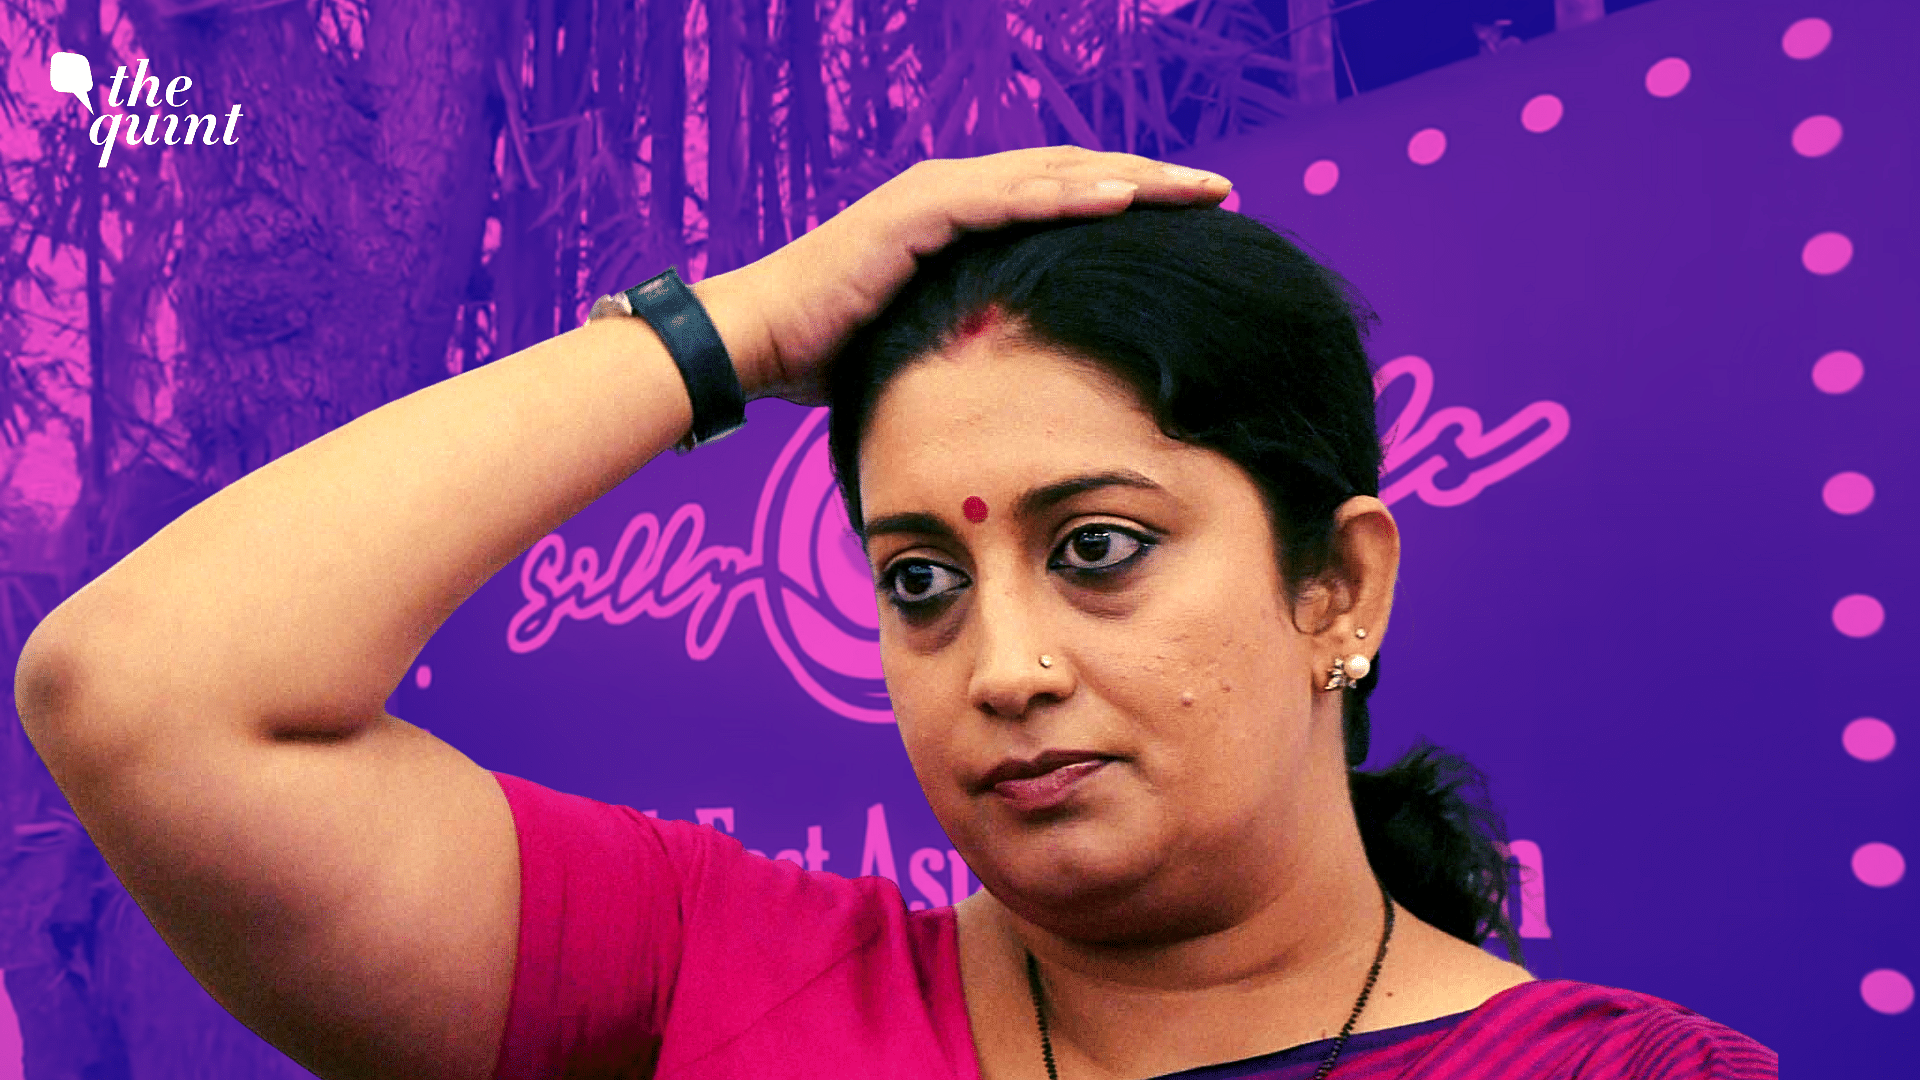 <div class="paragraphs"><p>Union Minister Smriti Irani with Silly Souls Cafe and Bar in the background. Representational image.&nbsp;</p></div>